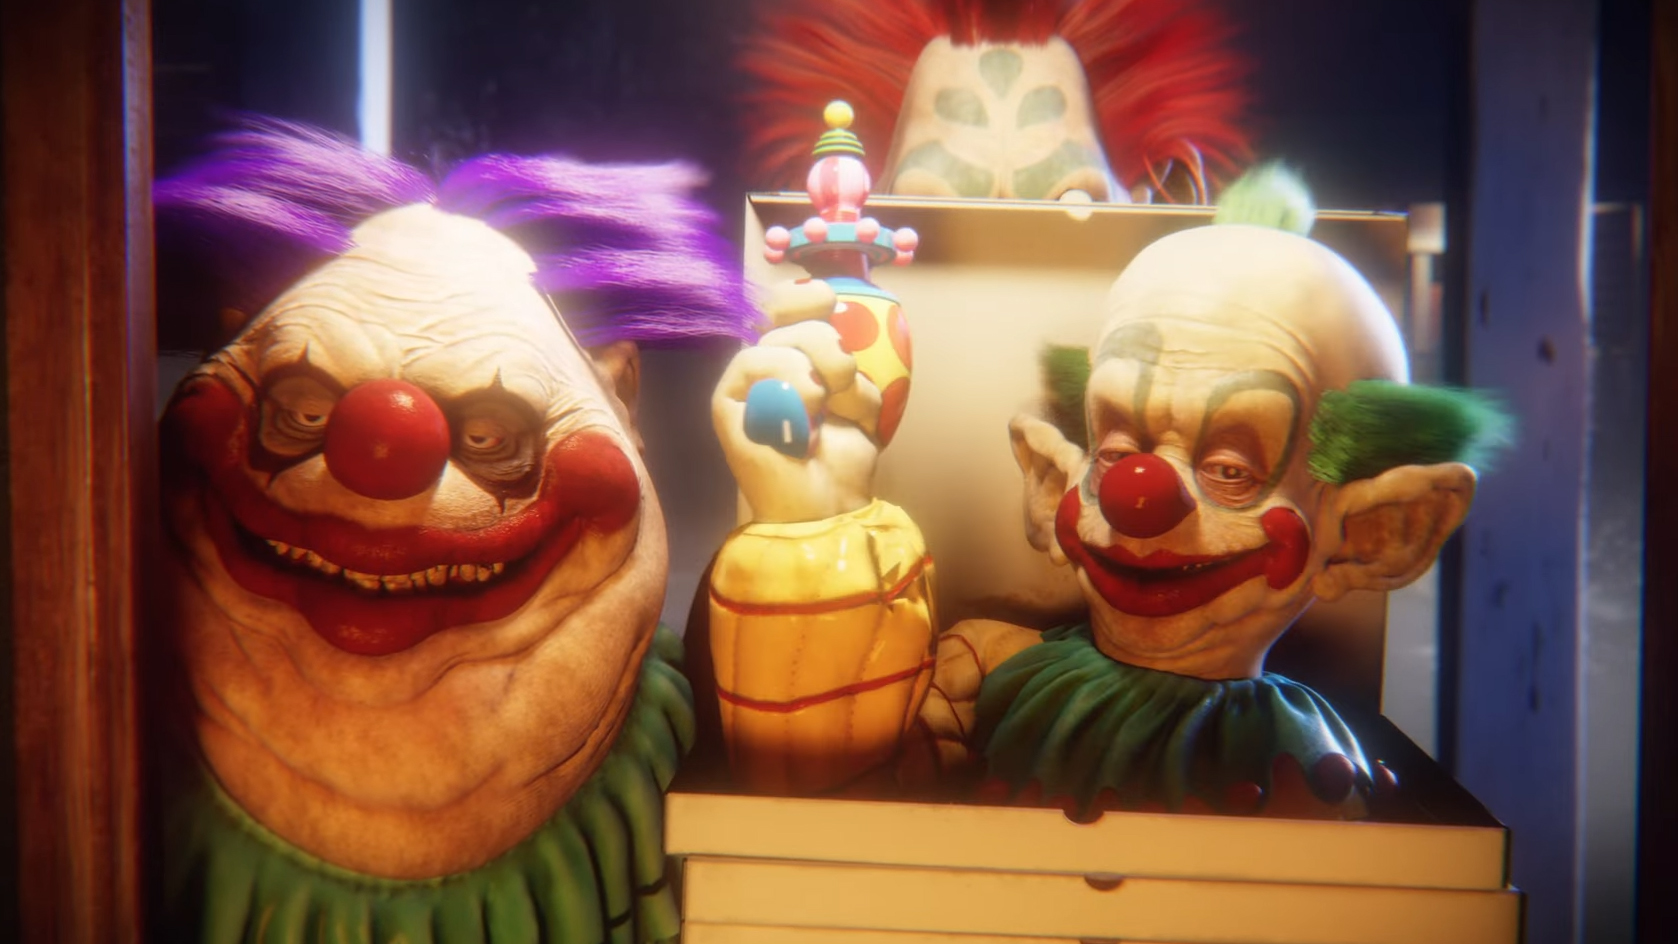  '80s cult classic Killer Klowns from Outer Space is becoming a multiplayer horror game 